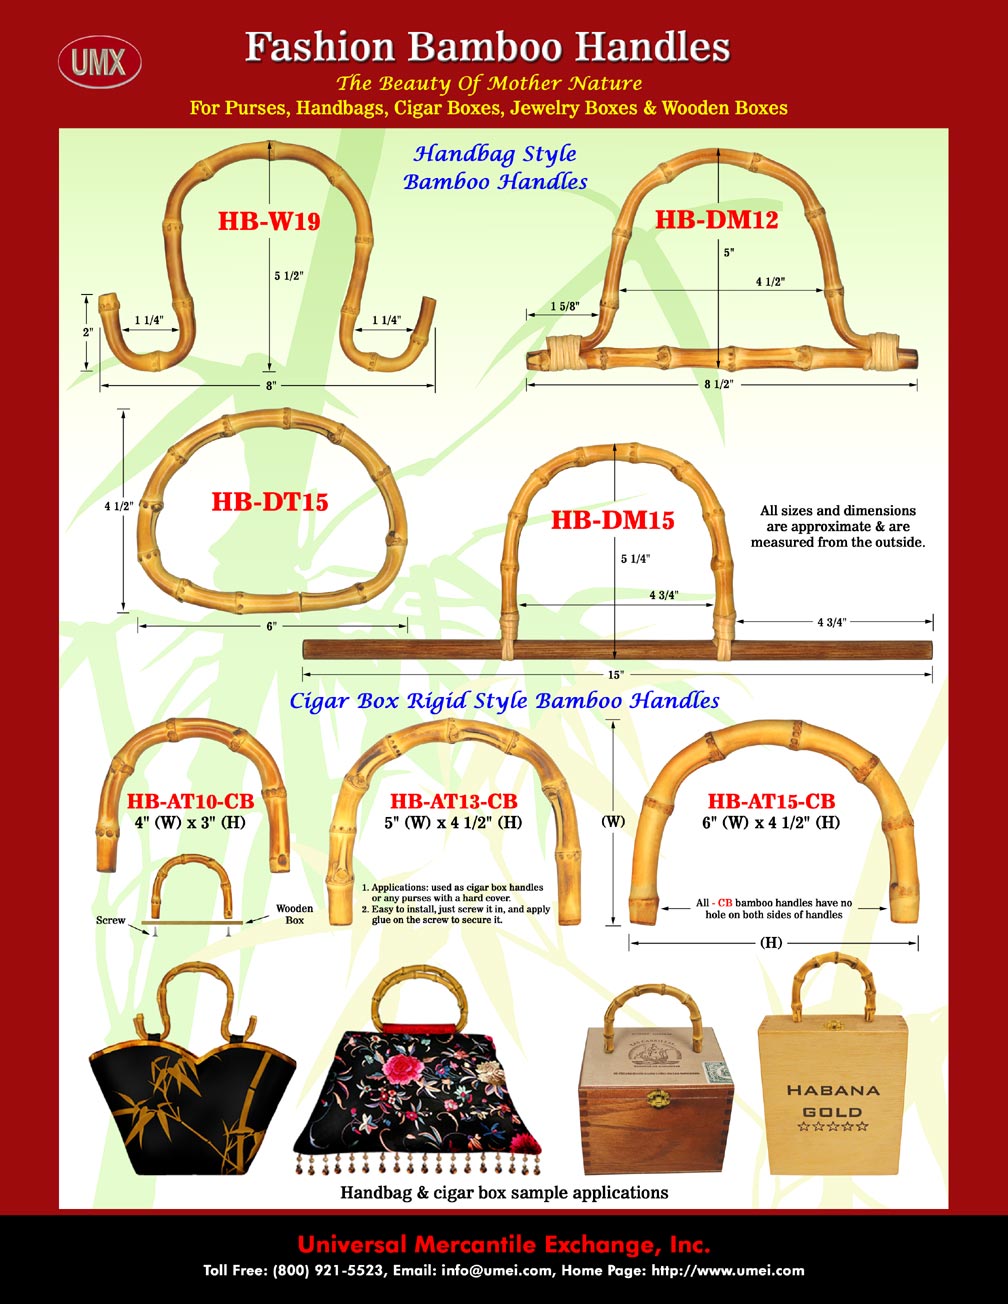 UMX Stylish Bamboo Handles For Fashion Purses, Handbags, Cigar Boxes, Jewelry Boxes
or Cigarbox Purse.